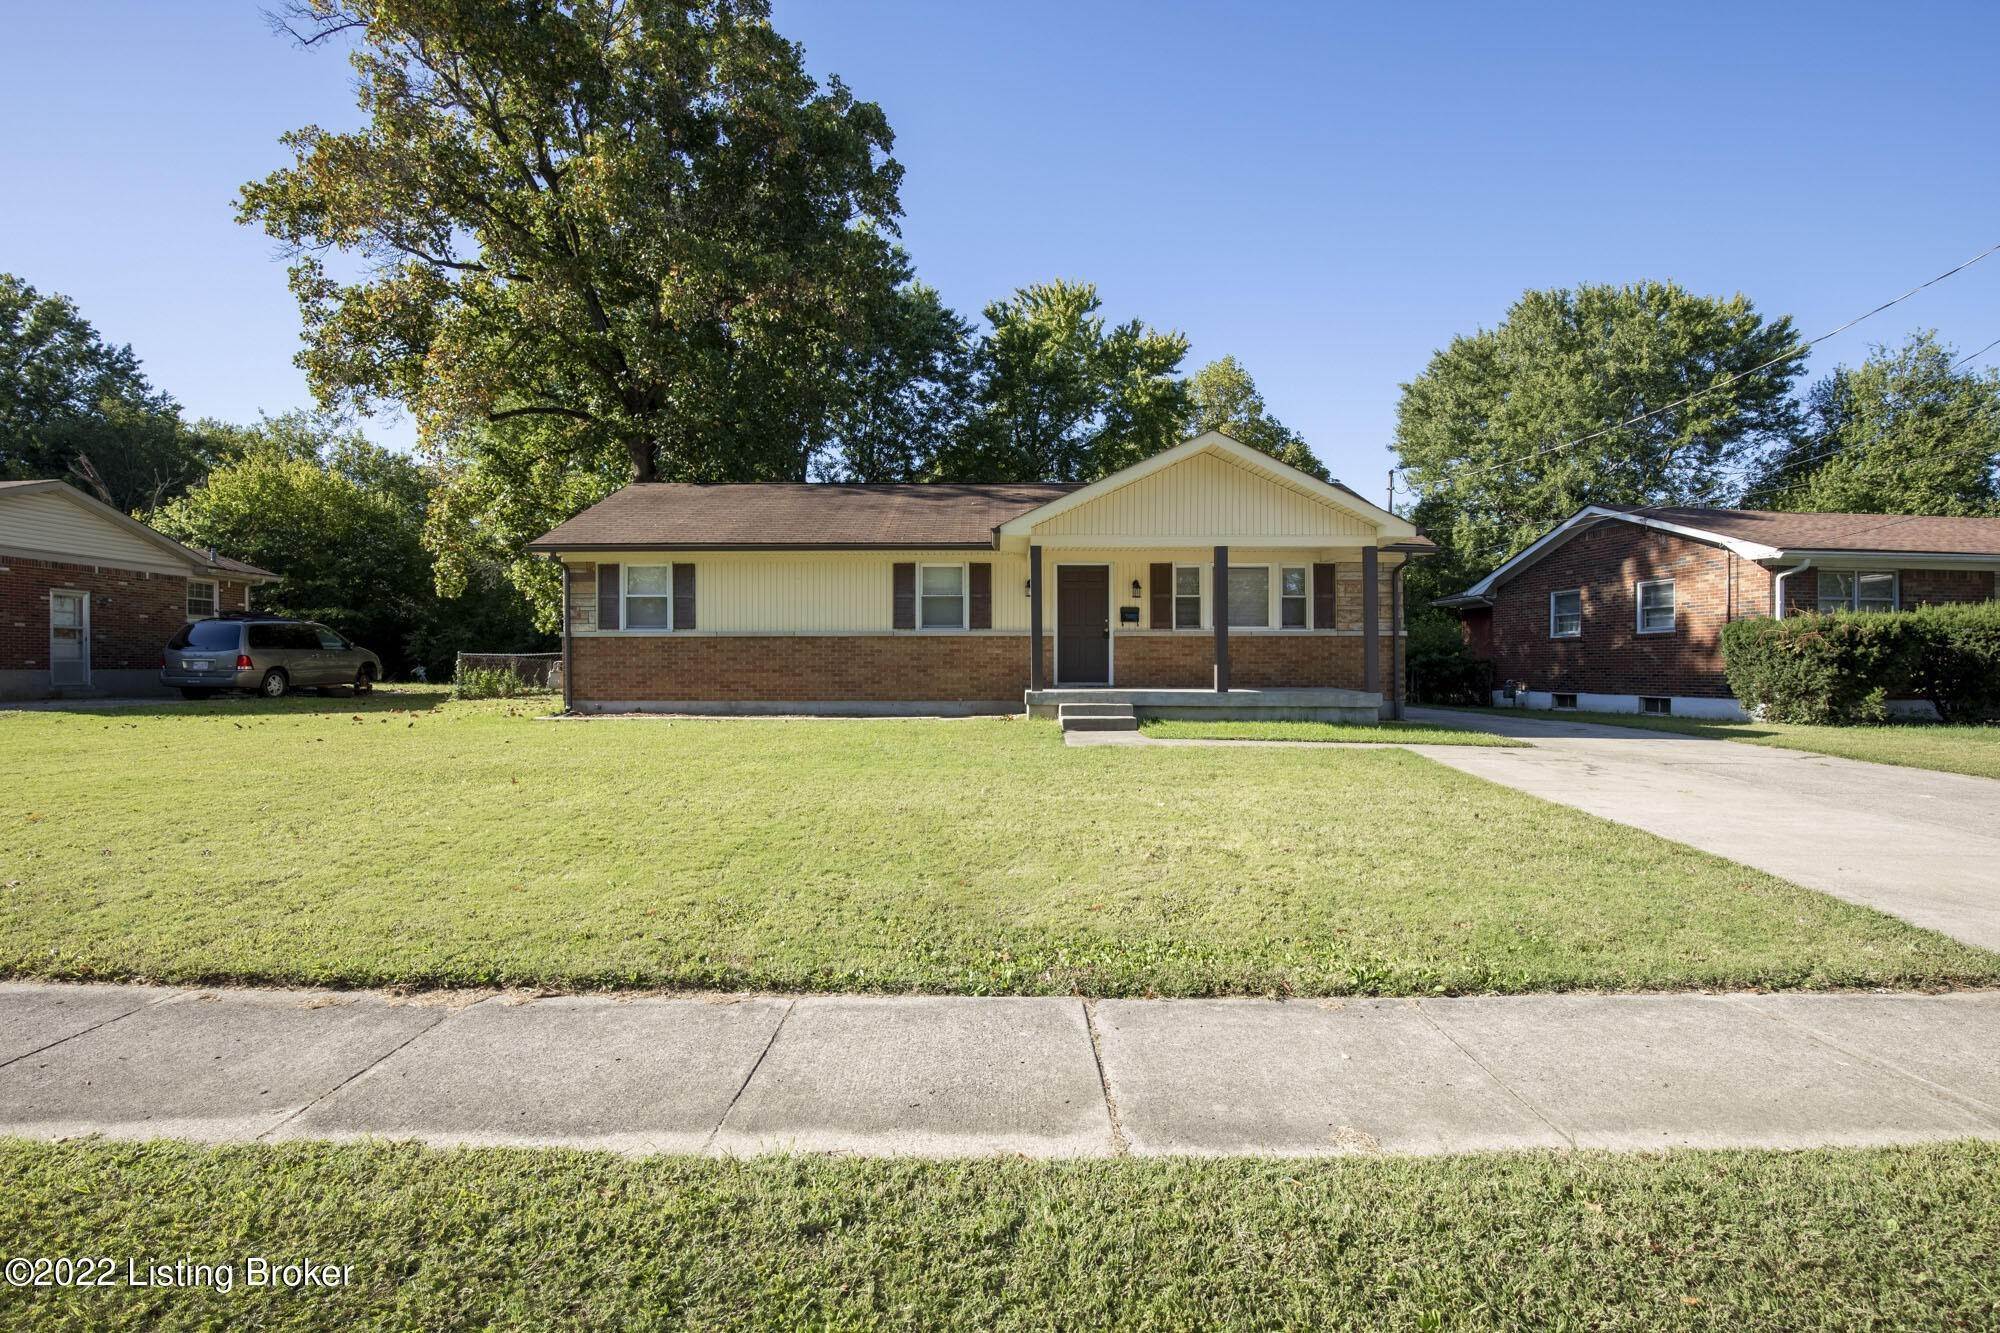 3. Single Family at Louisville, KY 40216